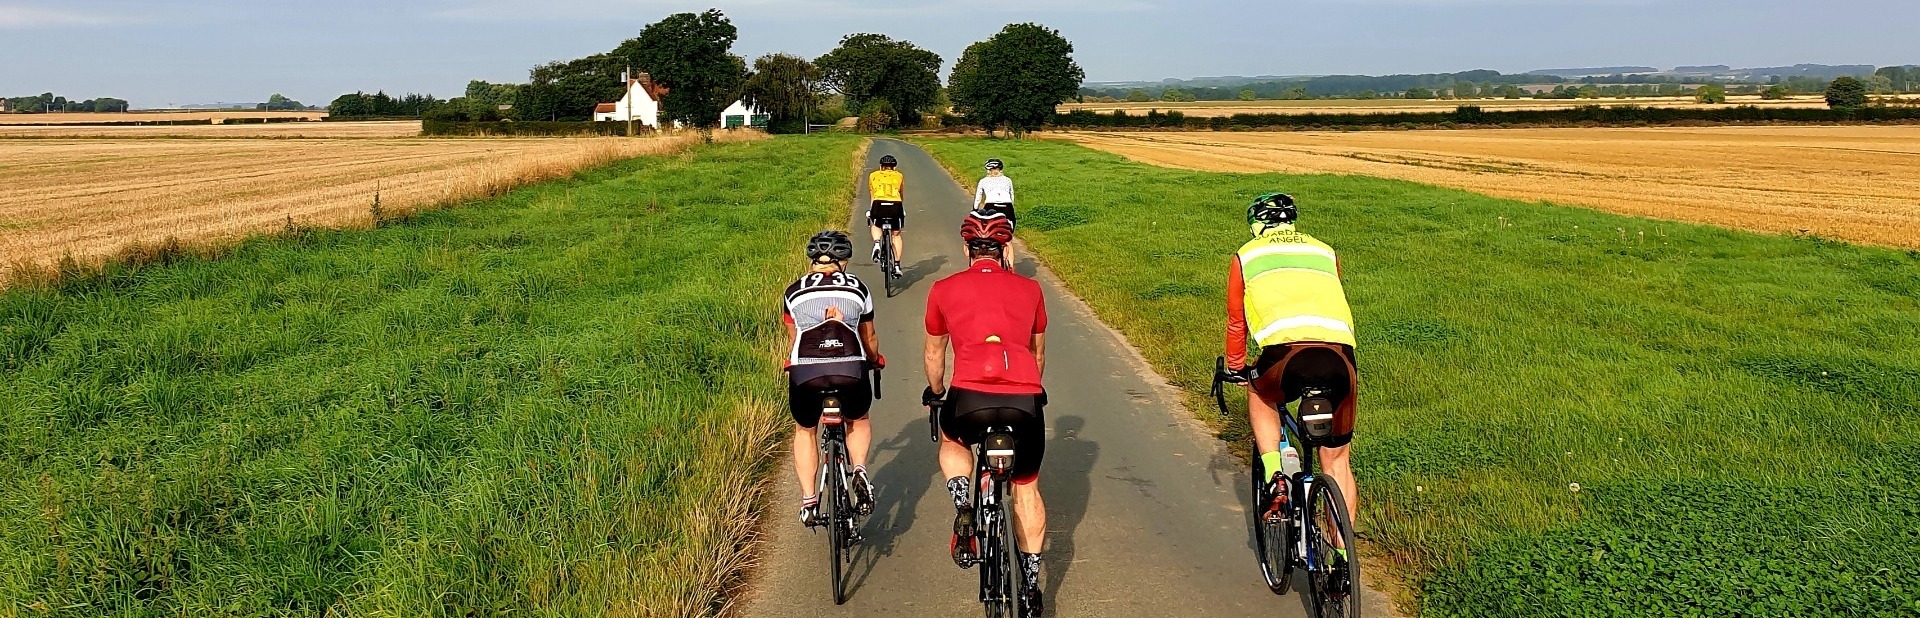 The quiet lanes of the Yorkshire Wolds Cycle Route